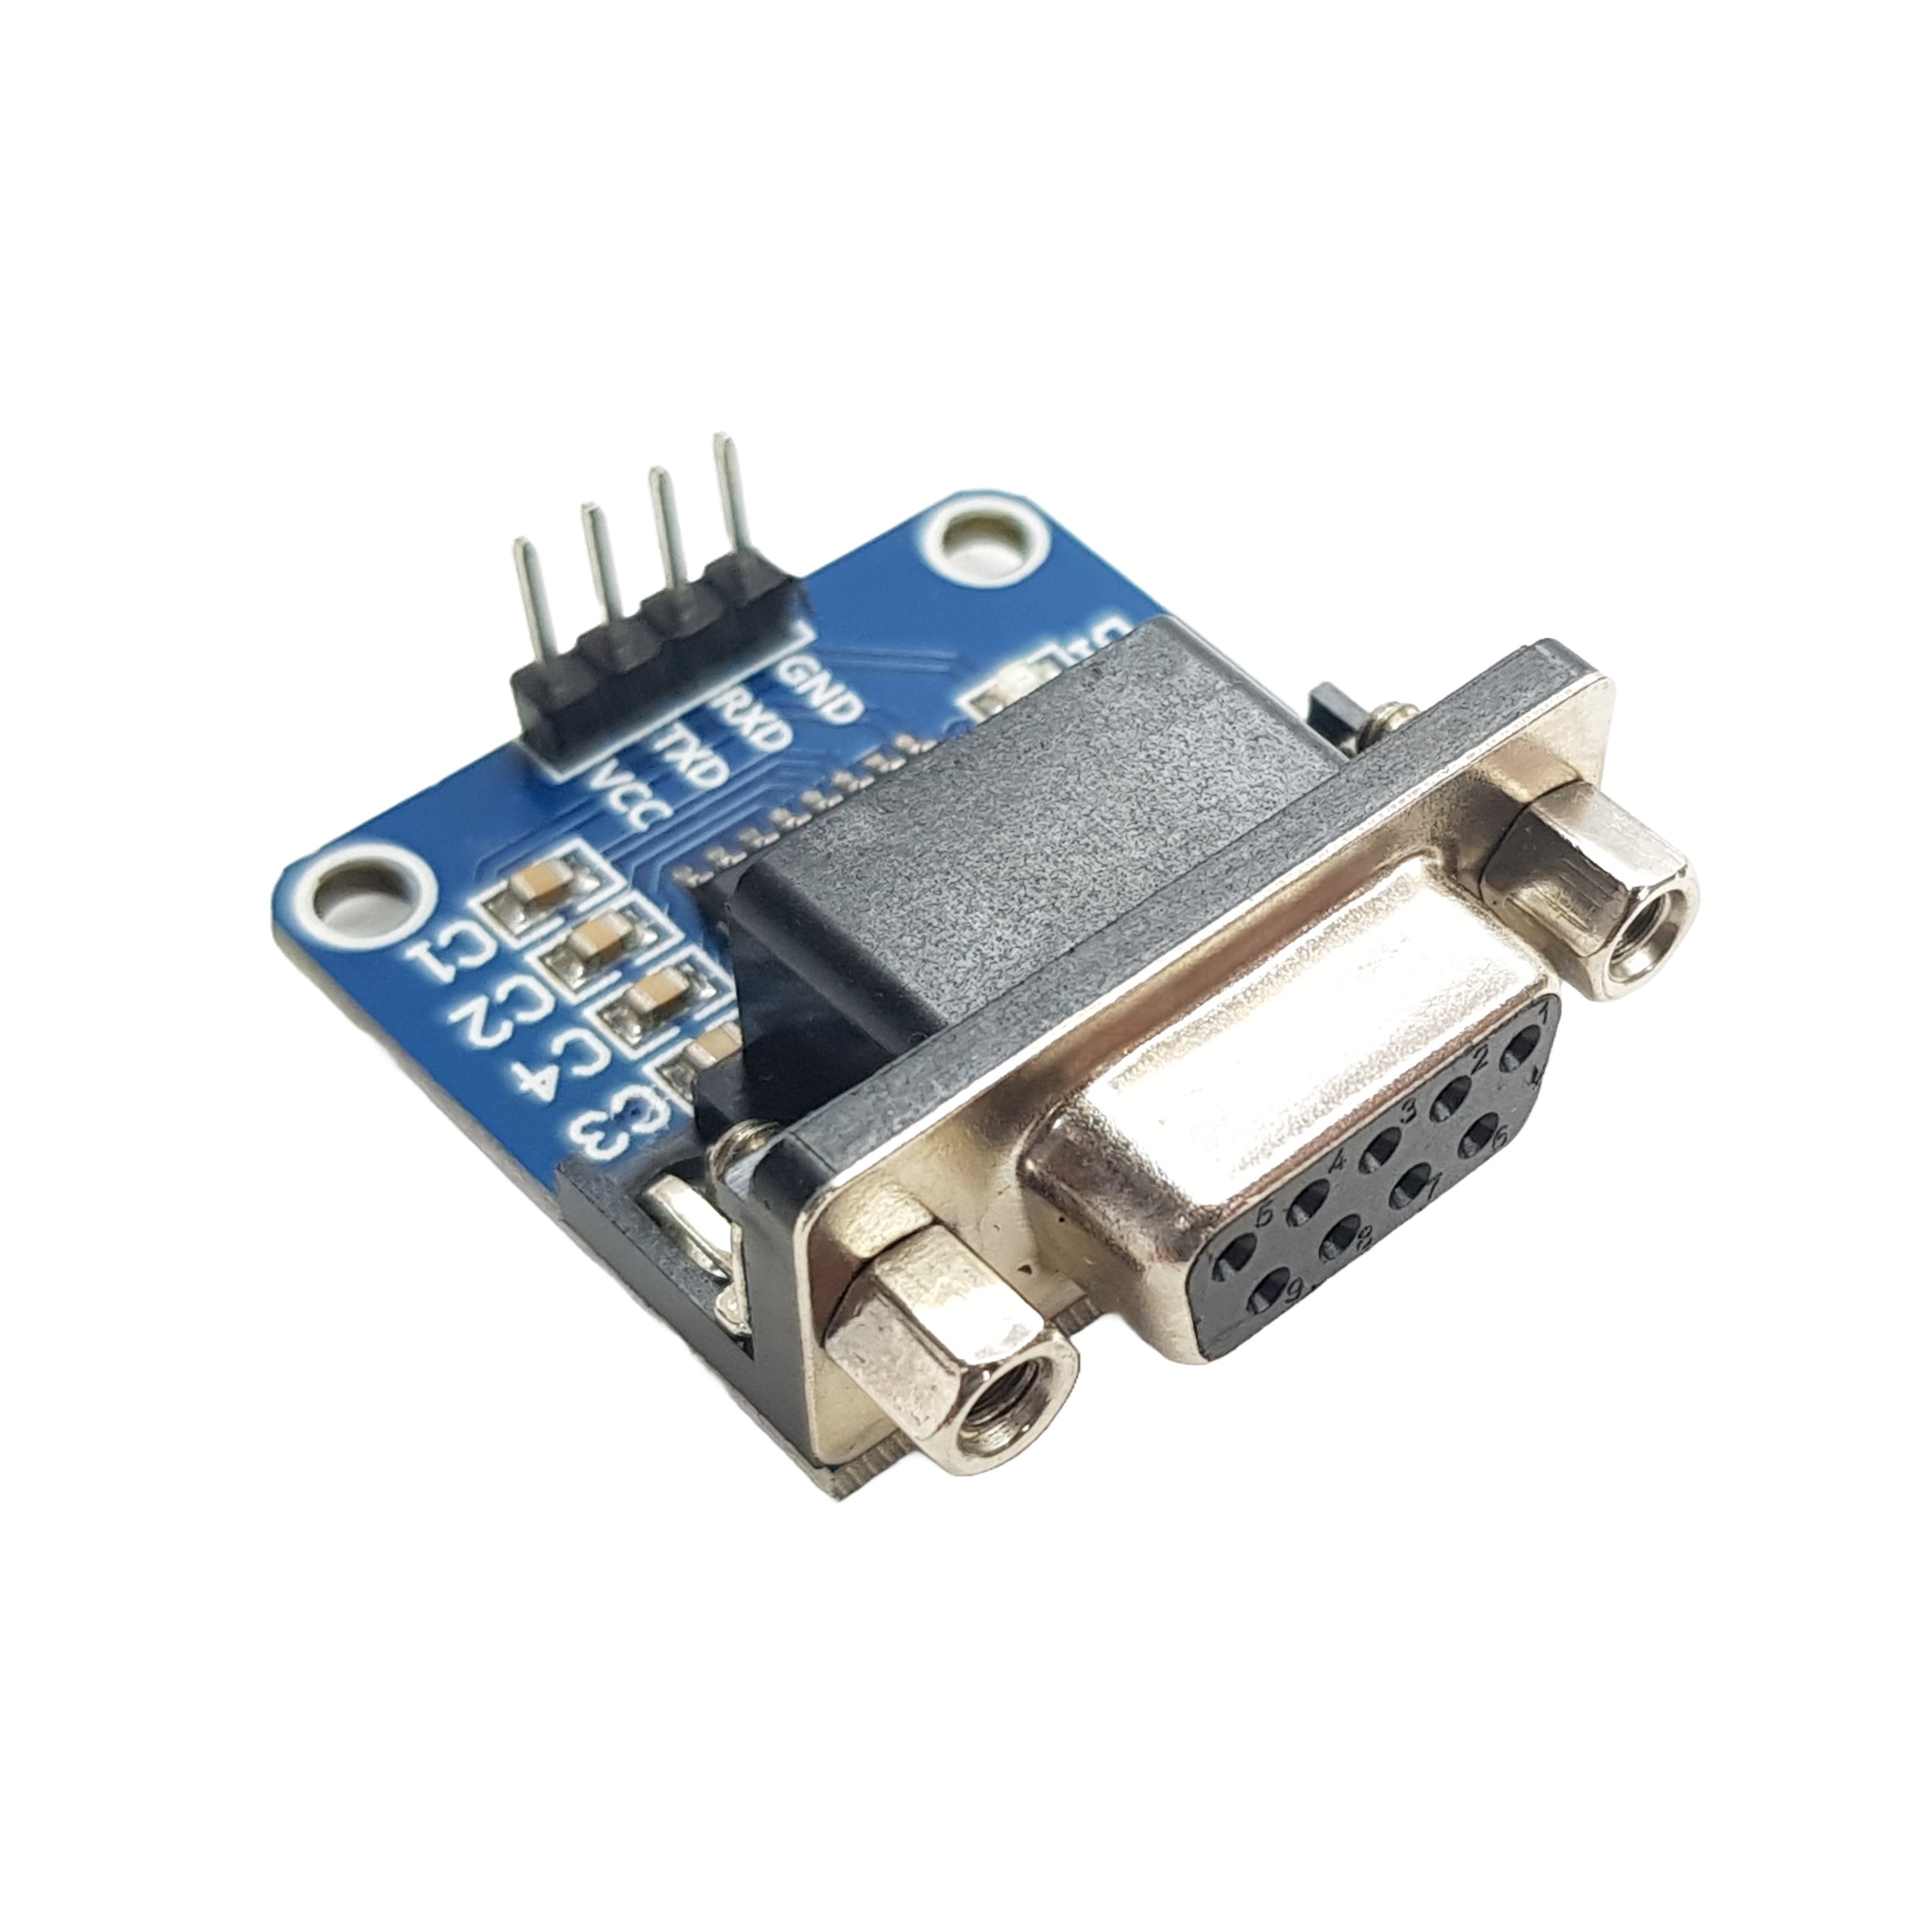 TTL to RS232 module